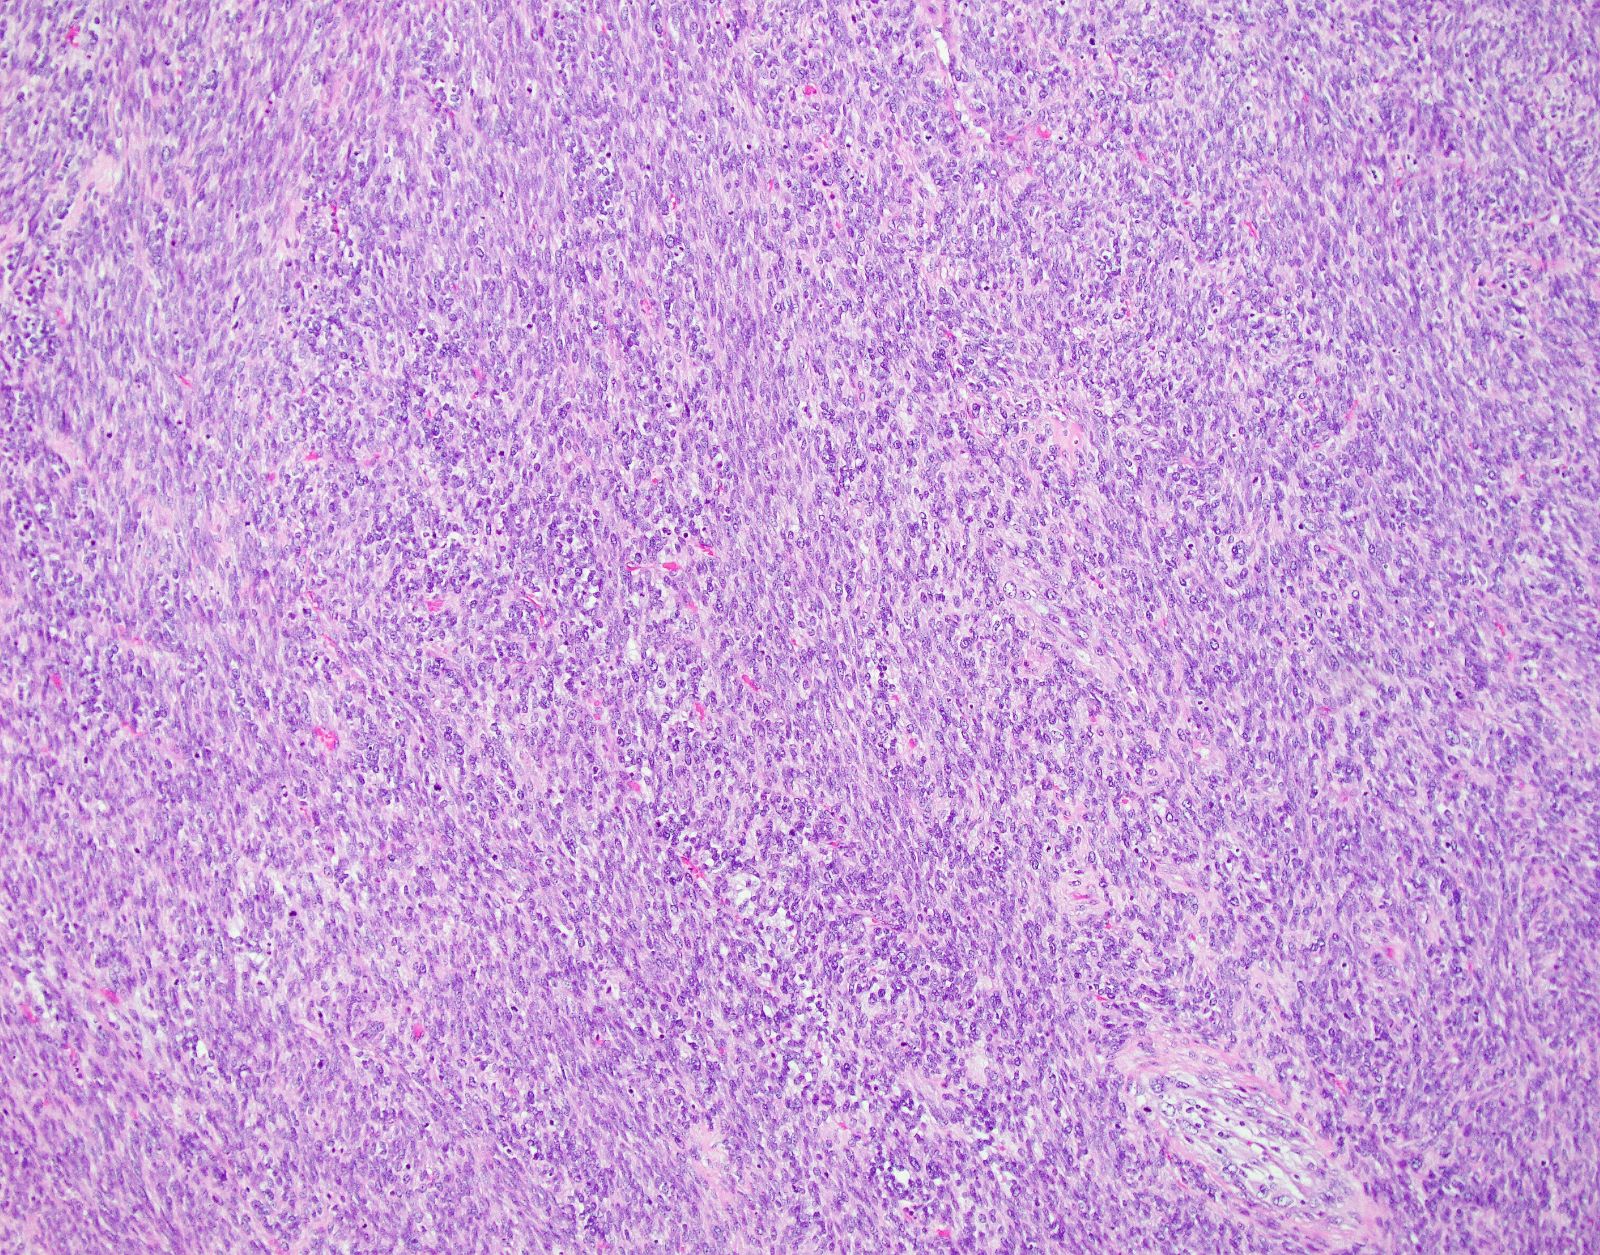 Spindle cell mesenchymal neoplasm